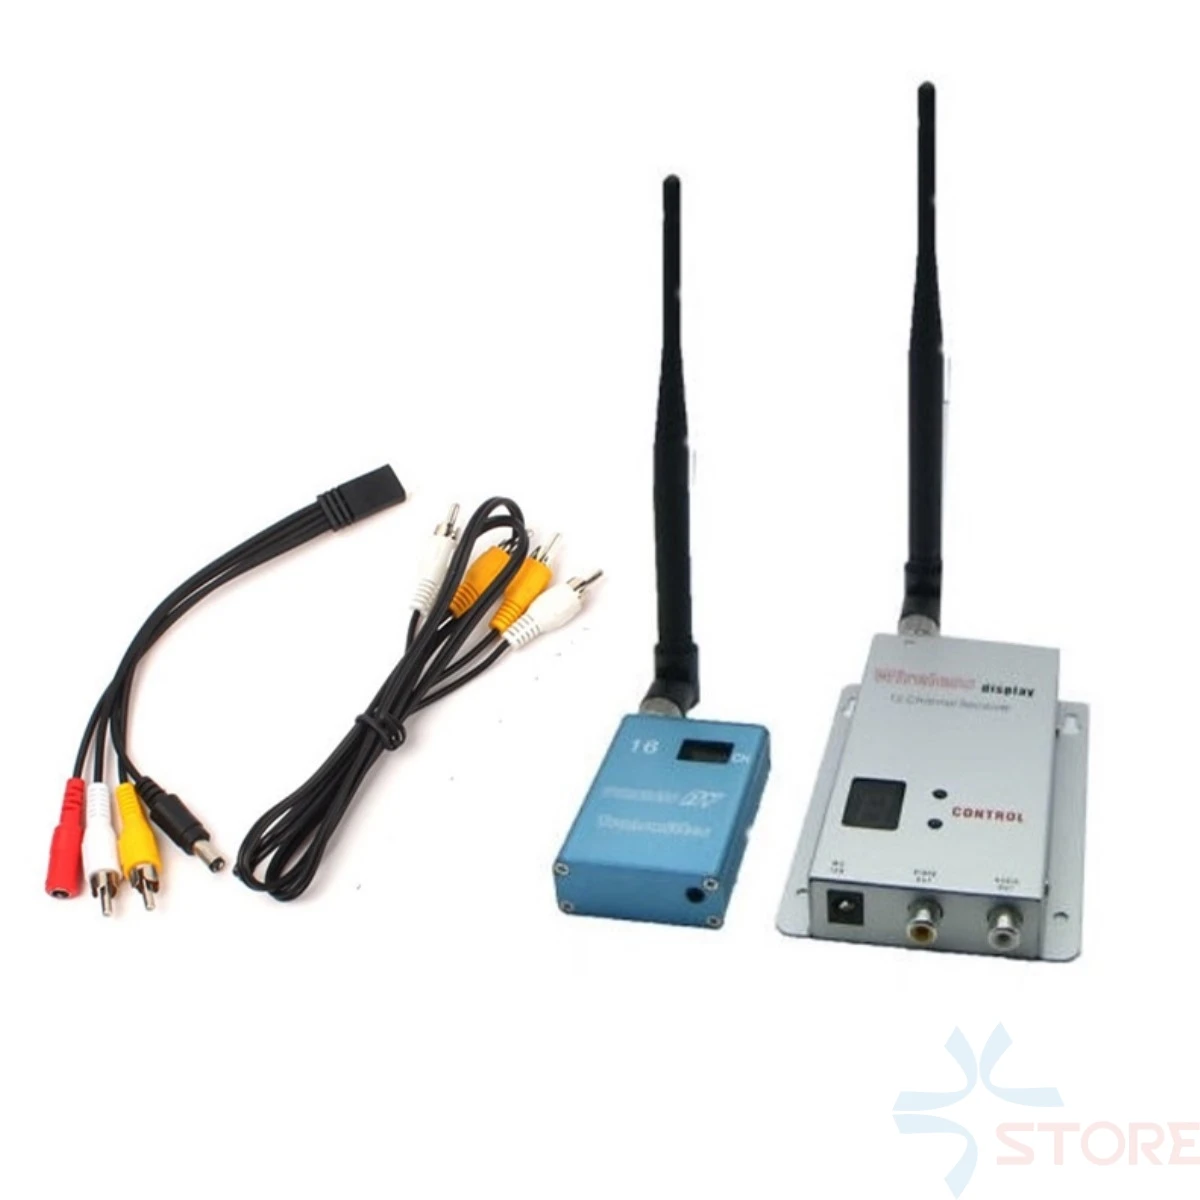 

1.2GHz 700mW 15CH Wireless Room-to-Room Audio/Video Transmitter Receiver 1.2G 0.7W Set for FPV Photography